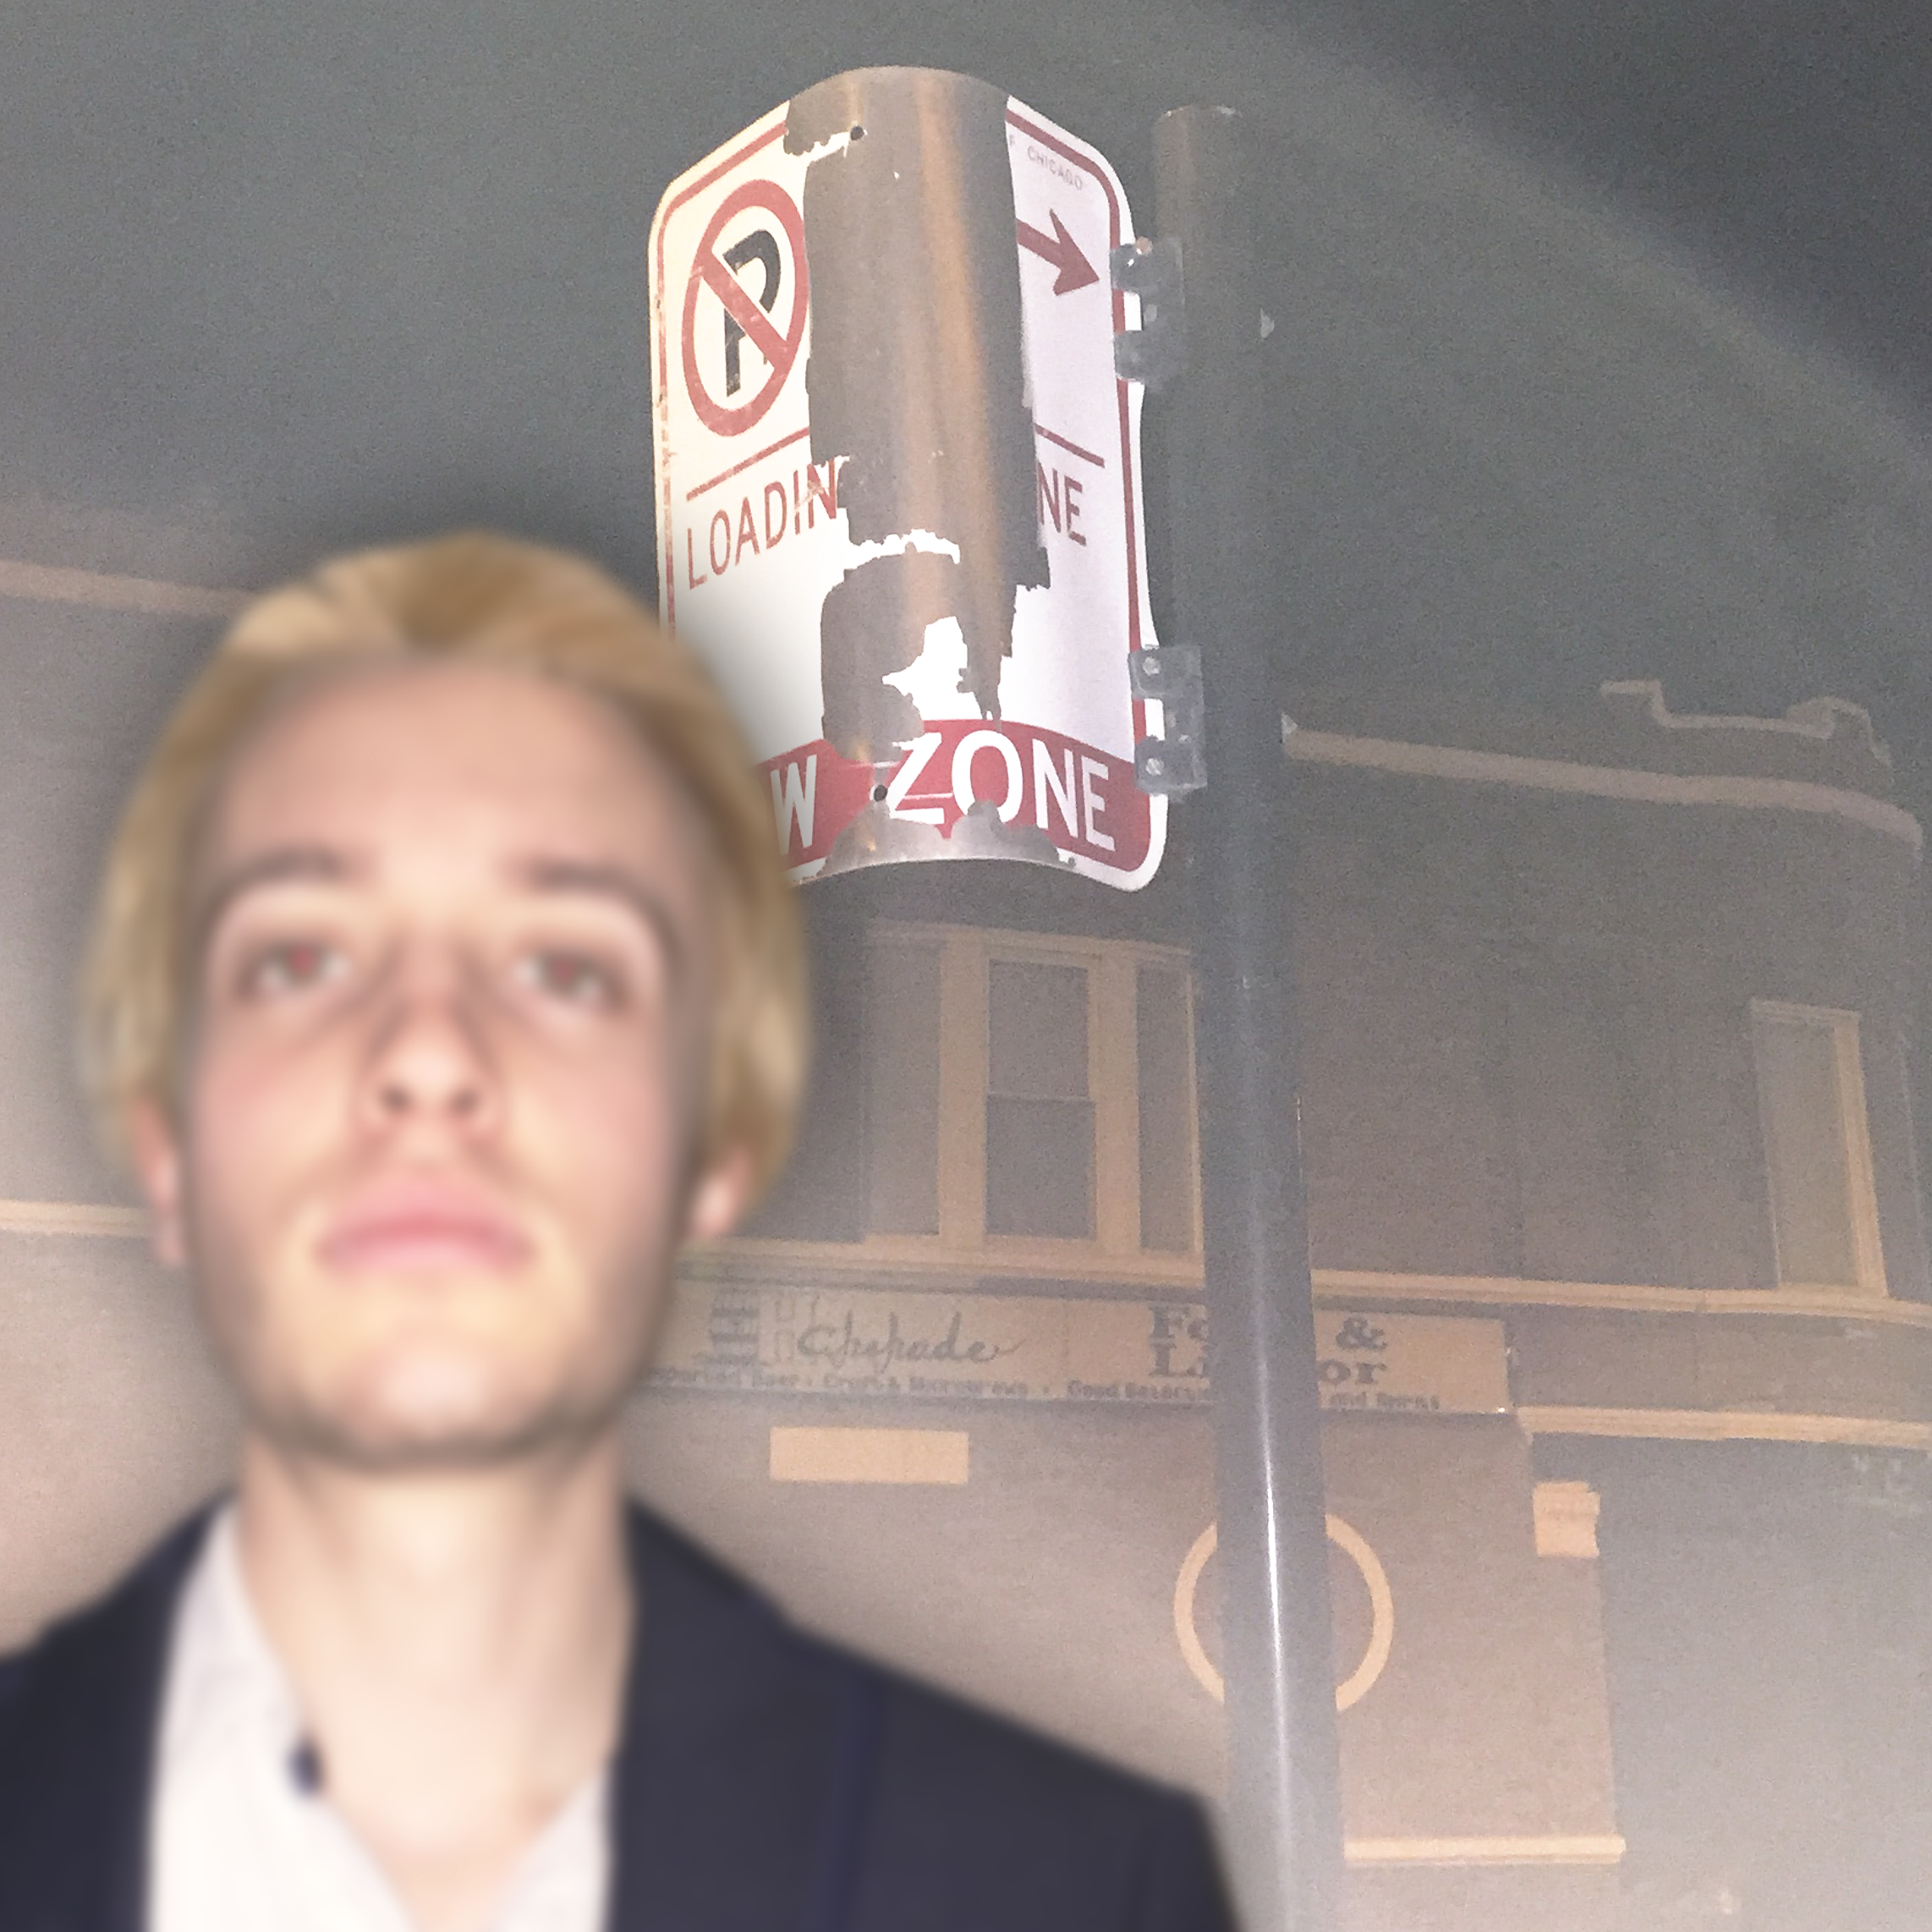 Butler out of focus in front of a broken parking sign outside at night